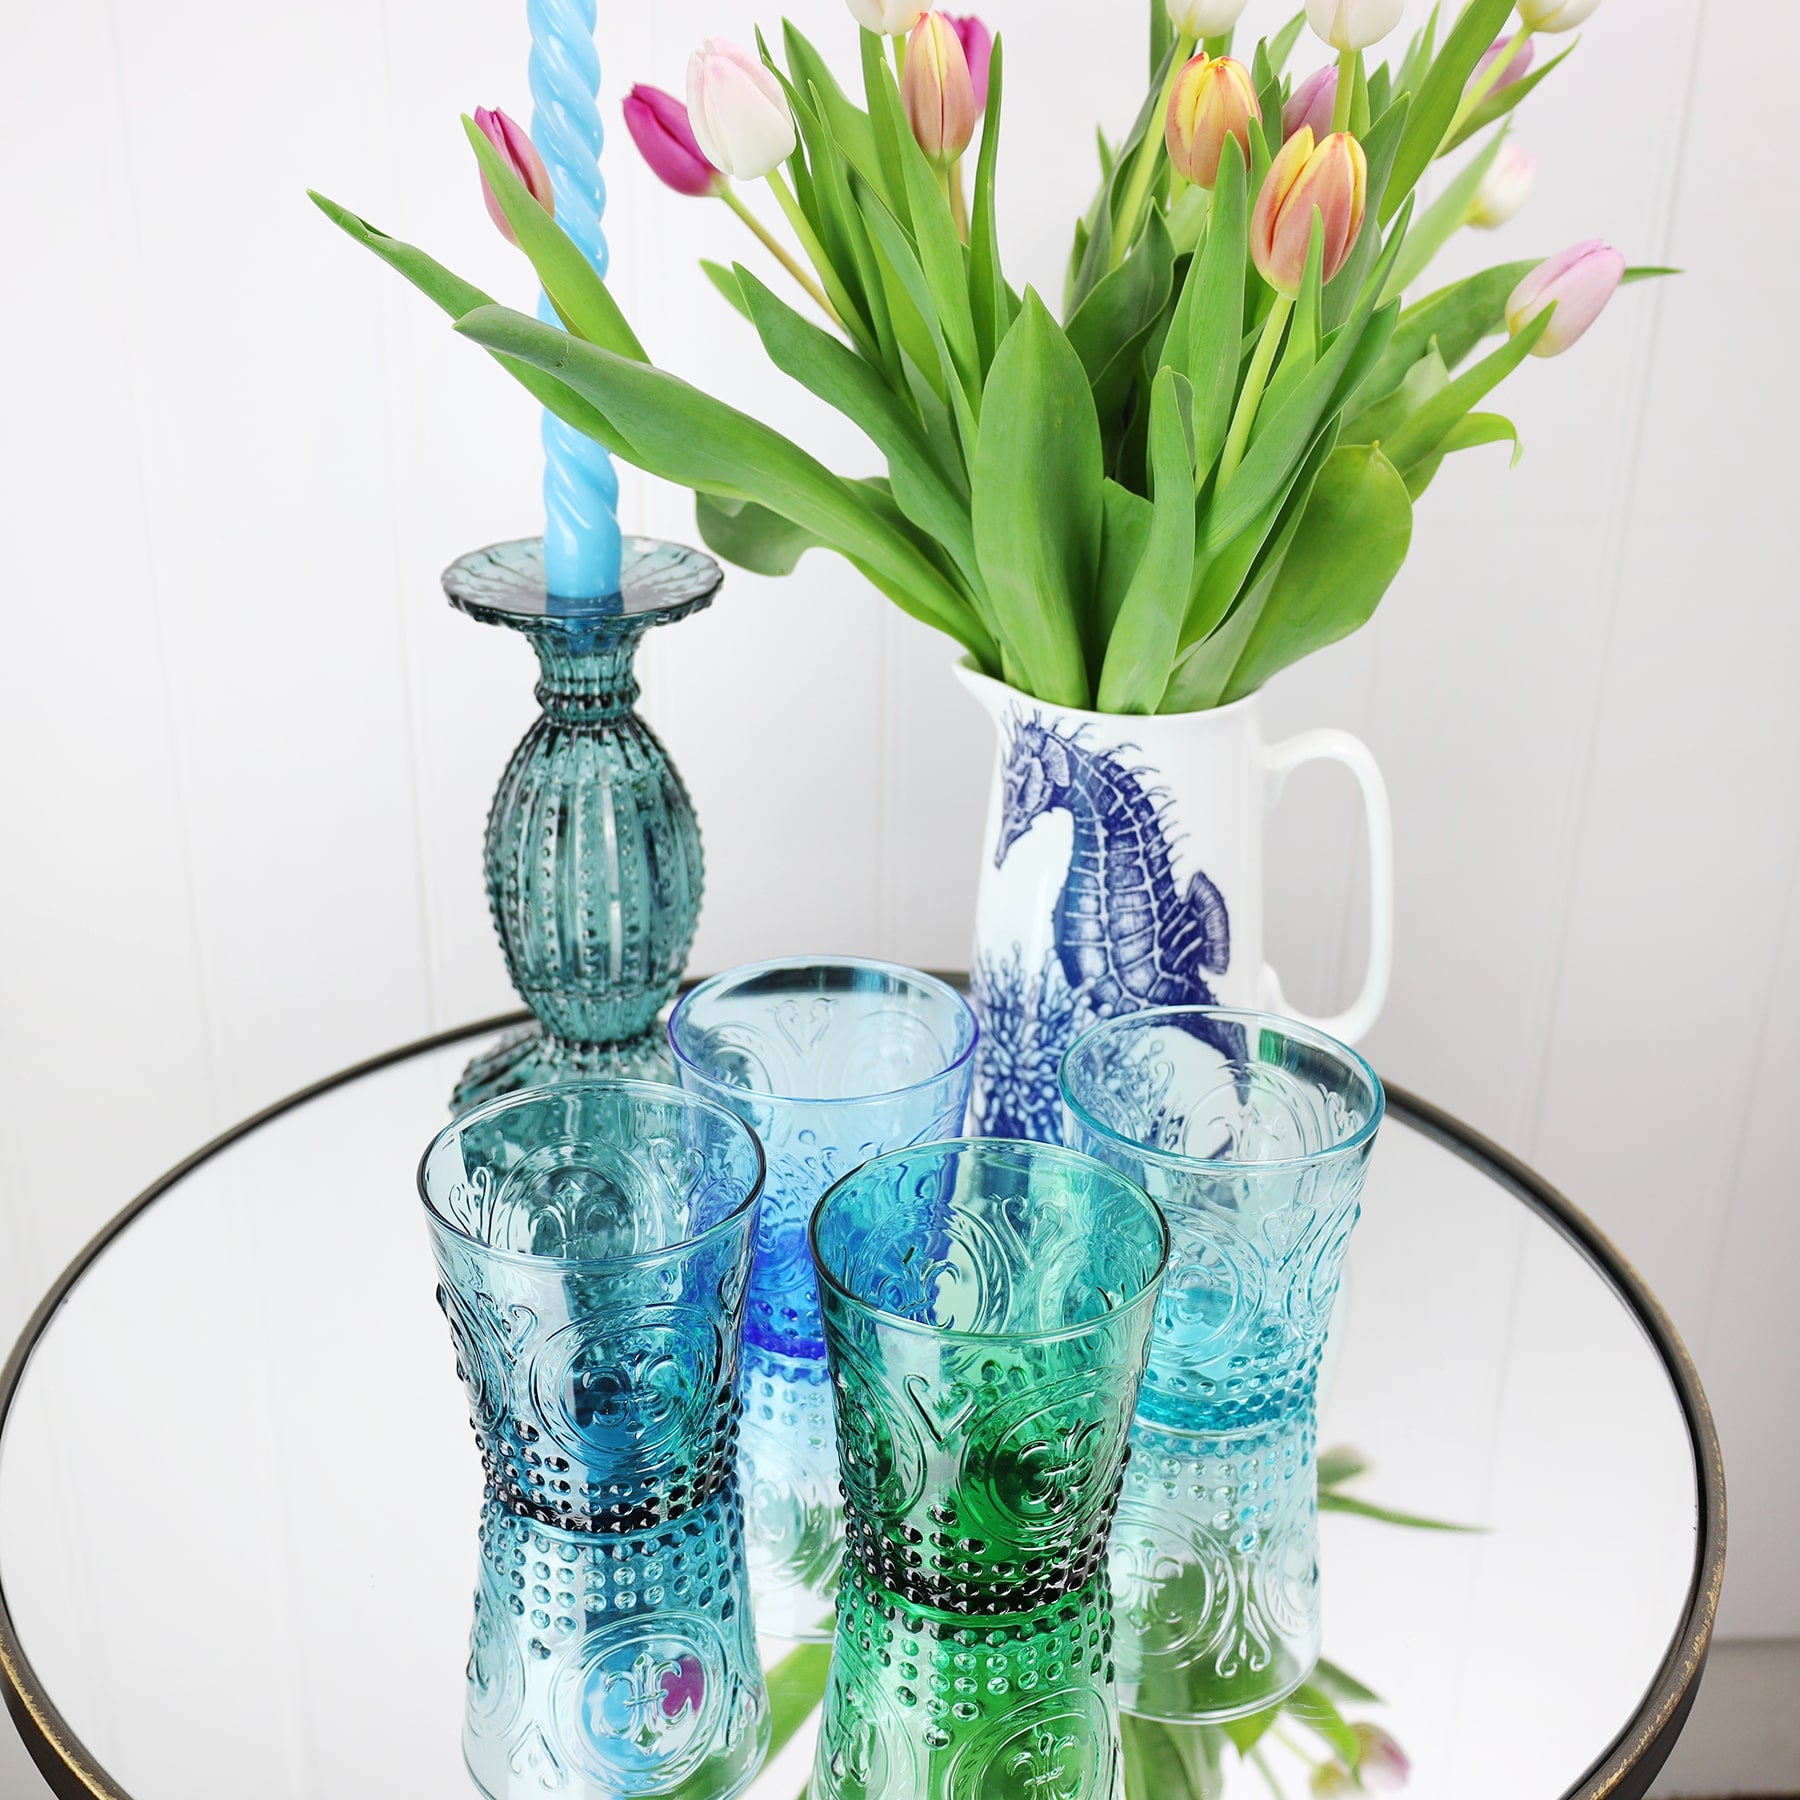 Teal Fleur de Lys Tumbler with other coloured glass tumblers on a mirror table with a seahorse jug filled with tulips